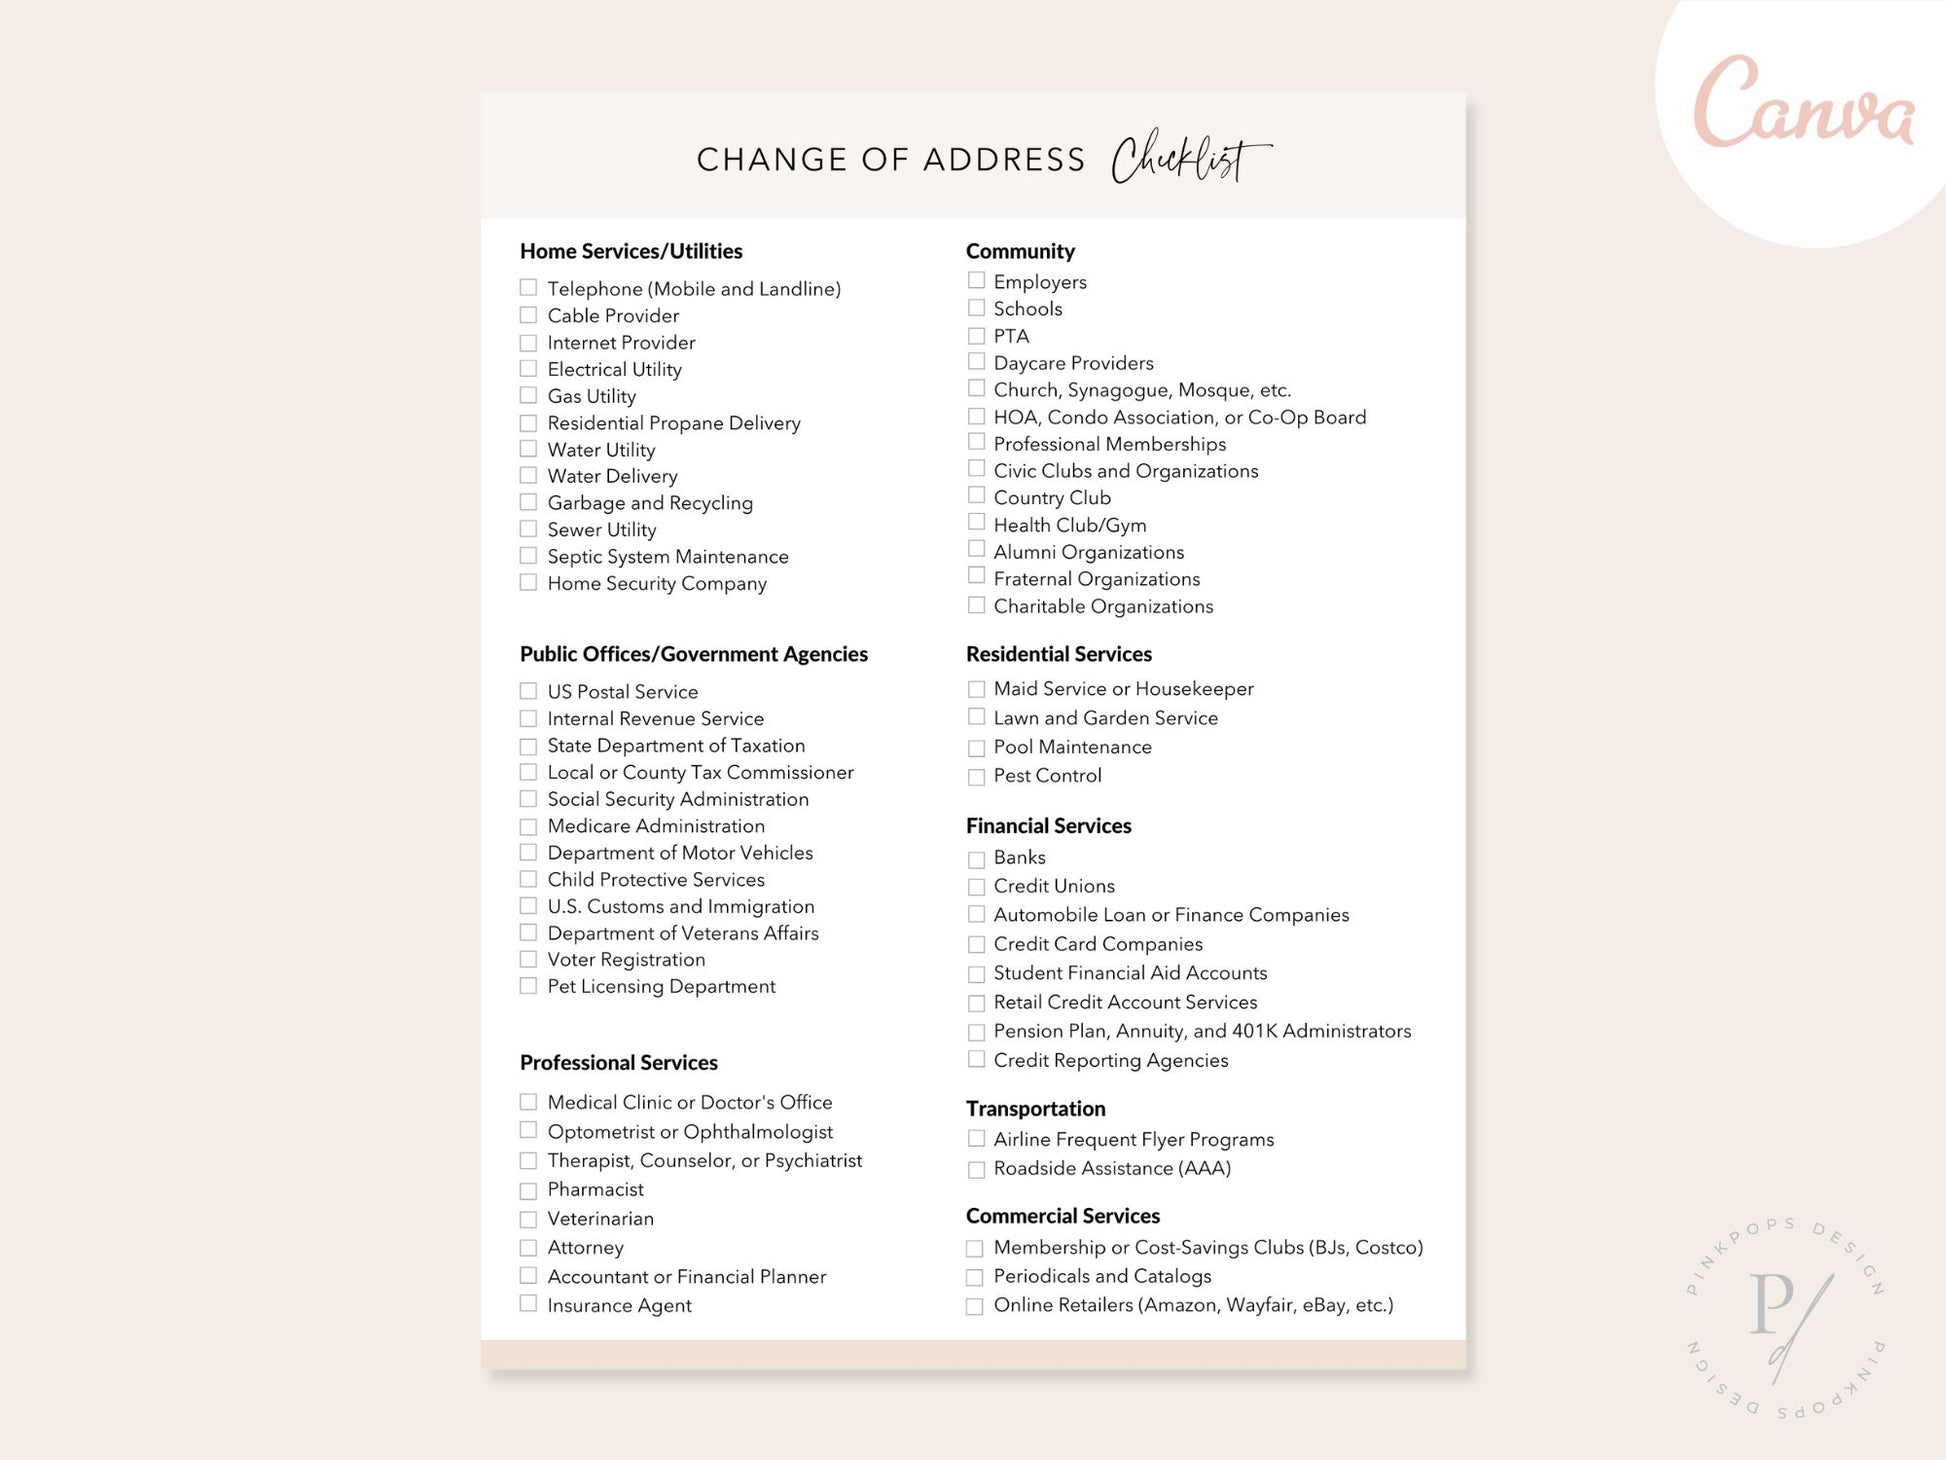 Real Estate Change of Address Checklist - Editable template for a seamless transition in the real estate moving process.